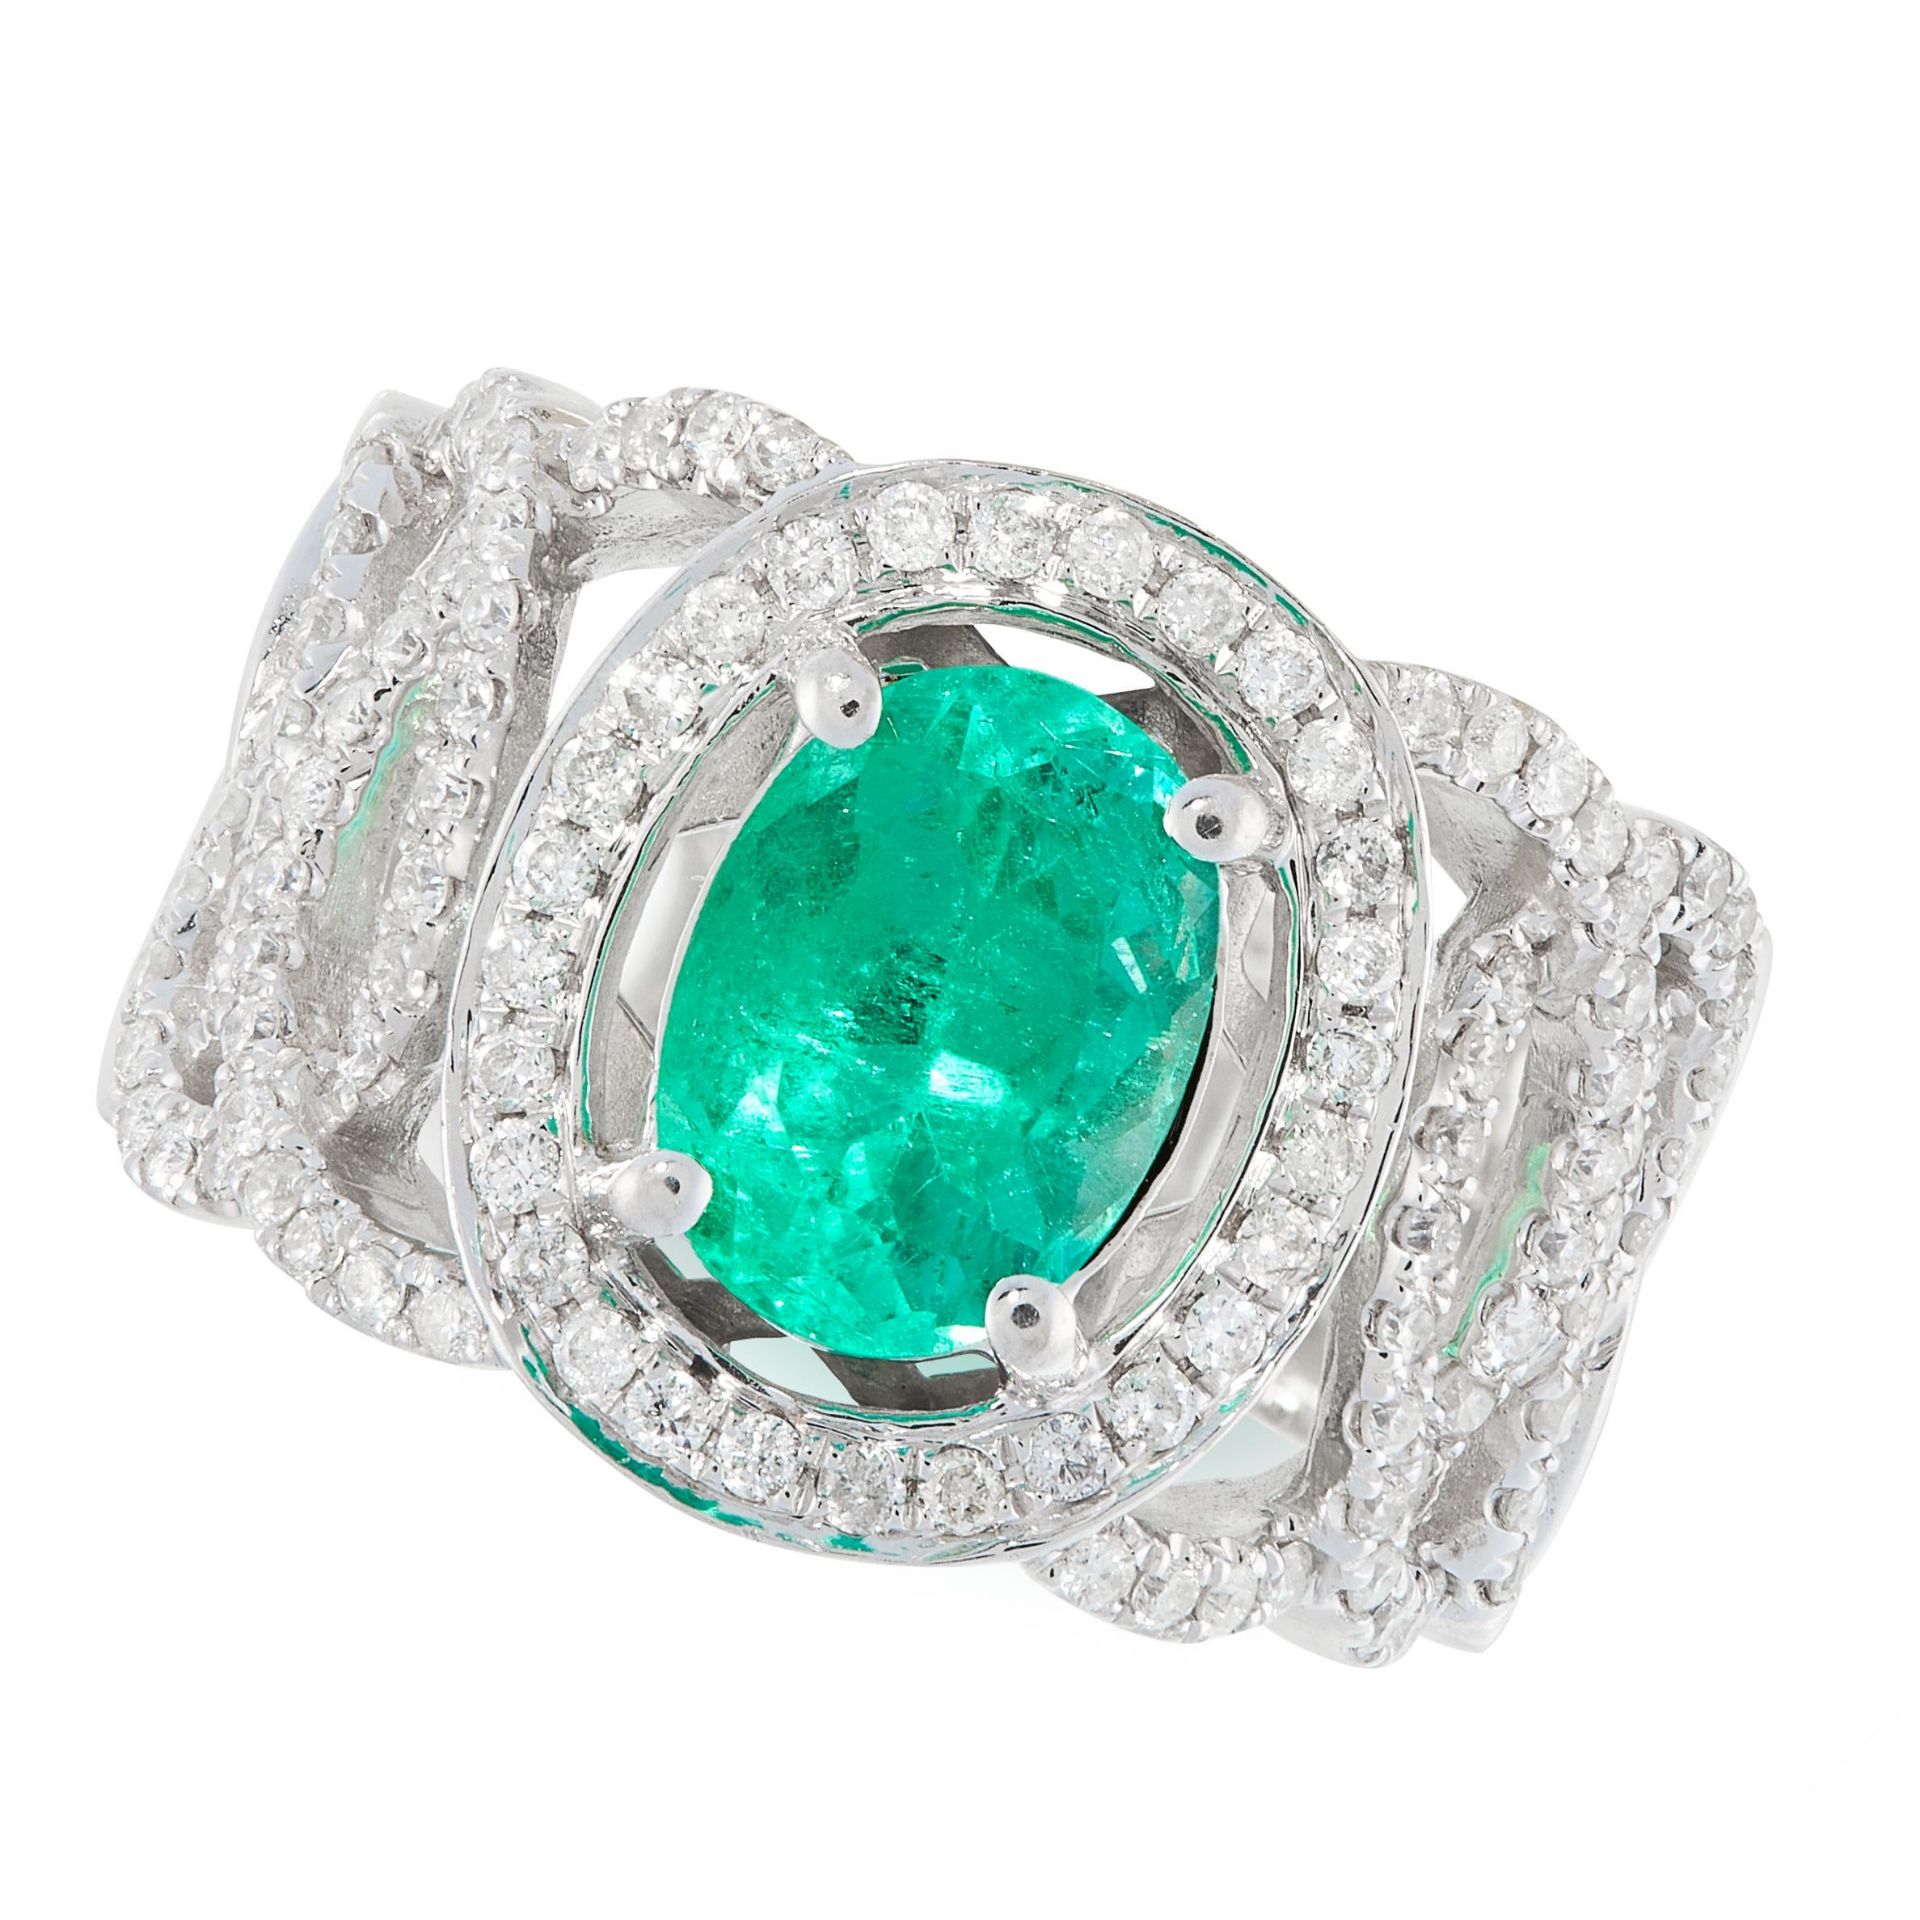 AN EMERALD AND DIAMOND DRESS RING set with an oval cut emerald of 1.72 carats, within a band